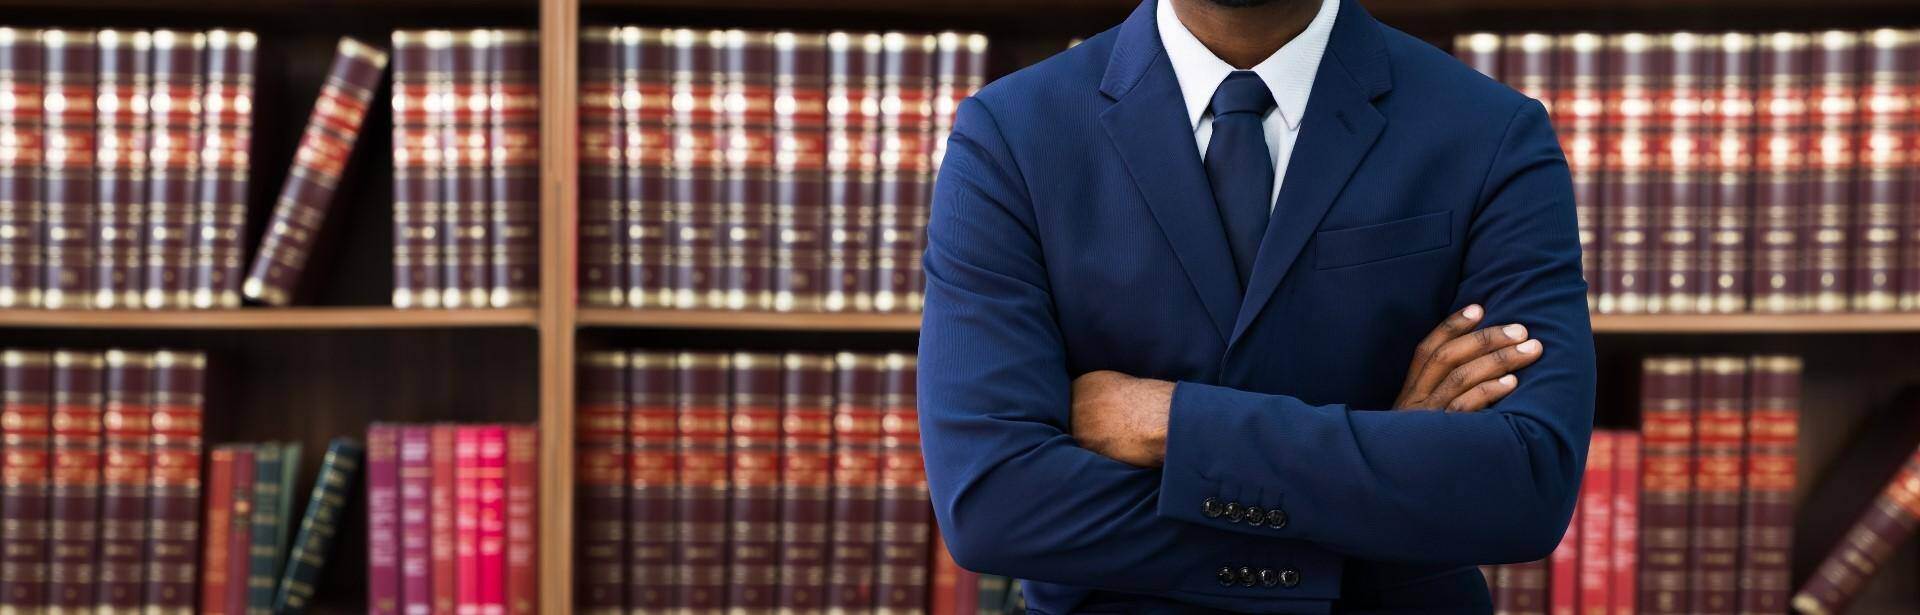 A black lawyer standing in front of a bookshelf of law book in Mableton, Georgia